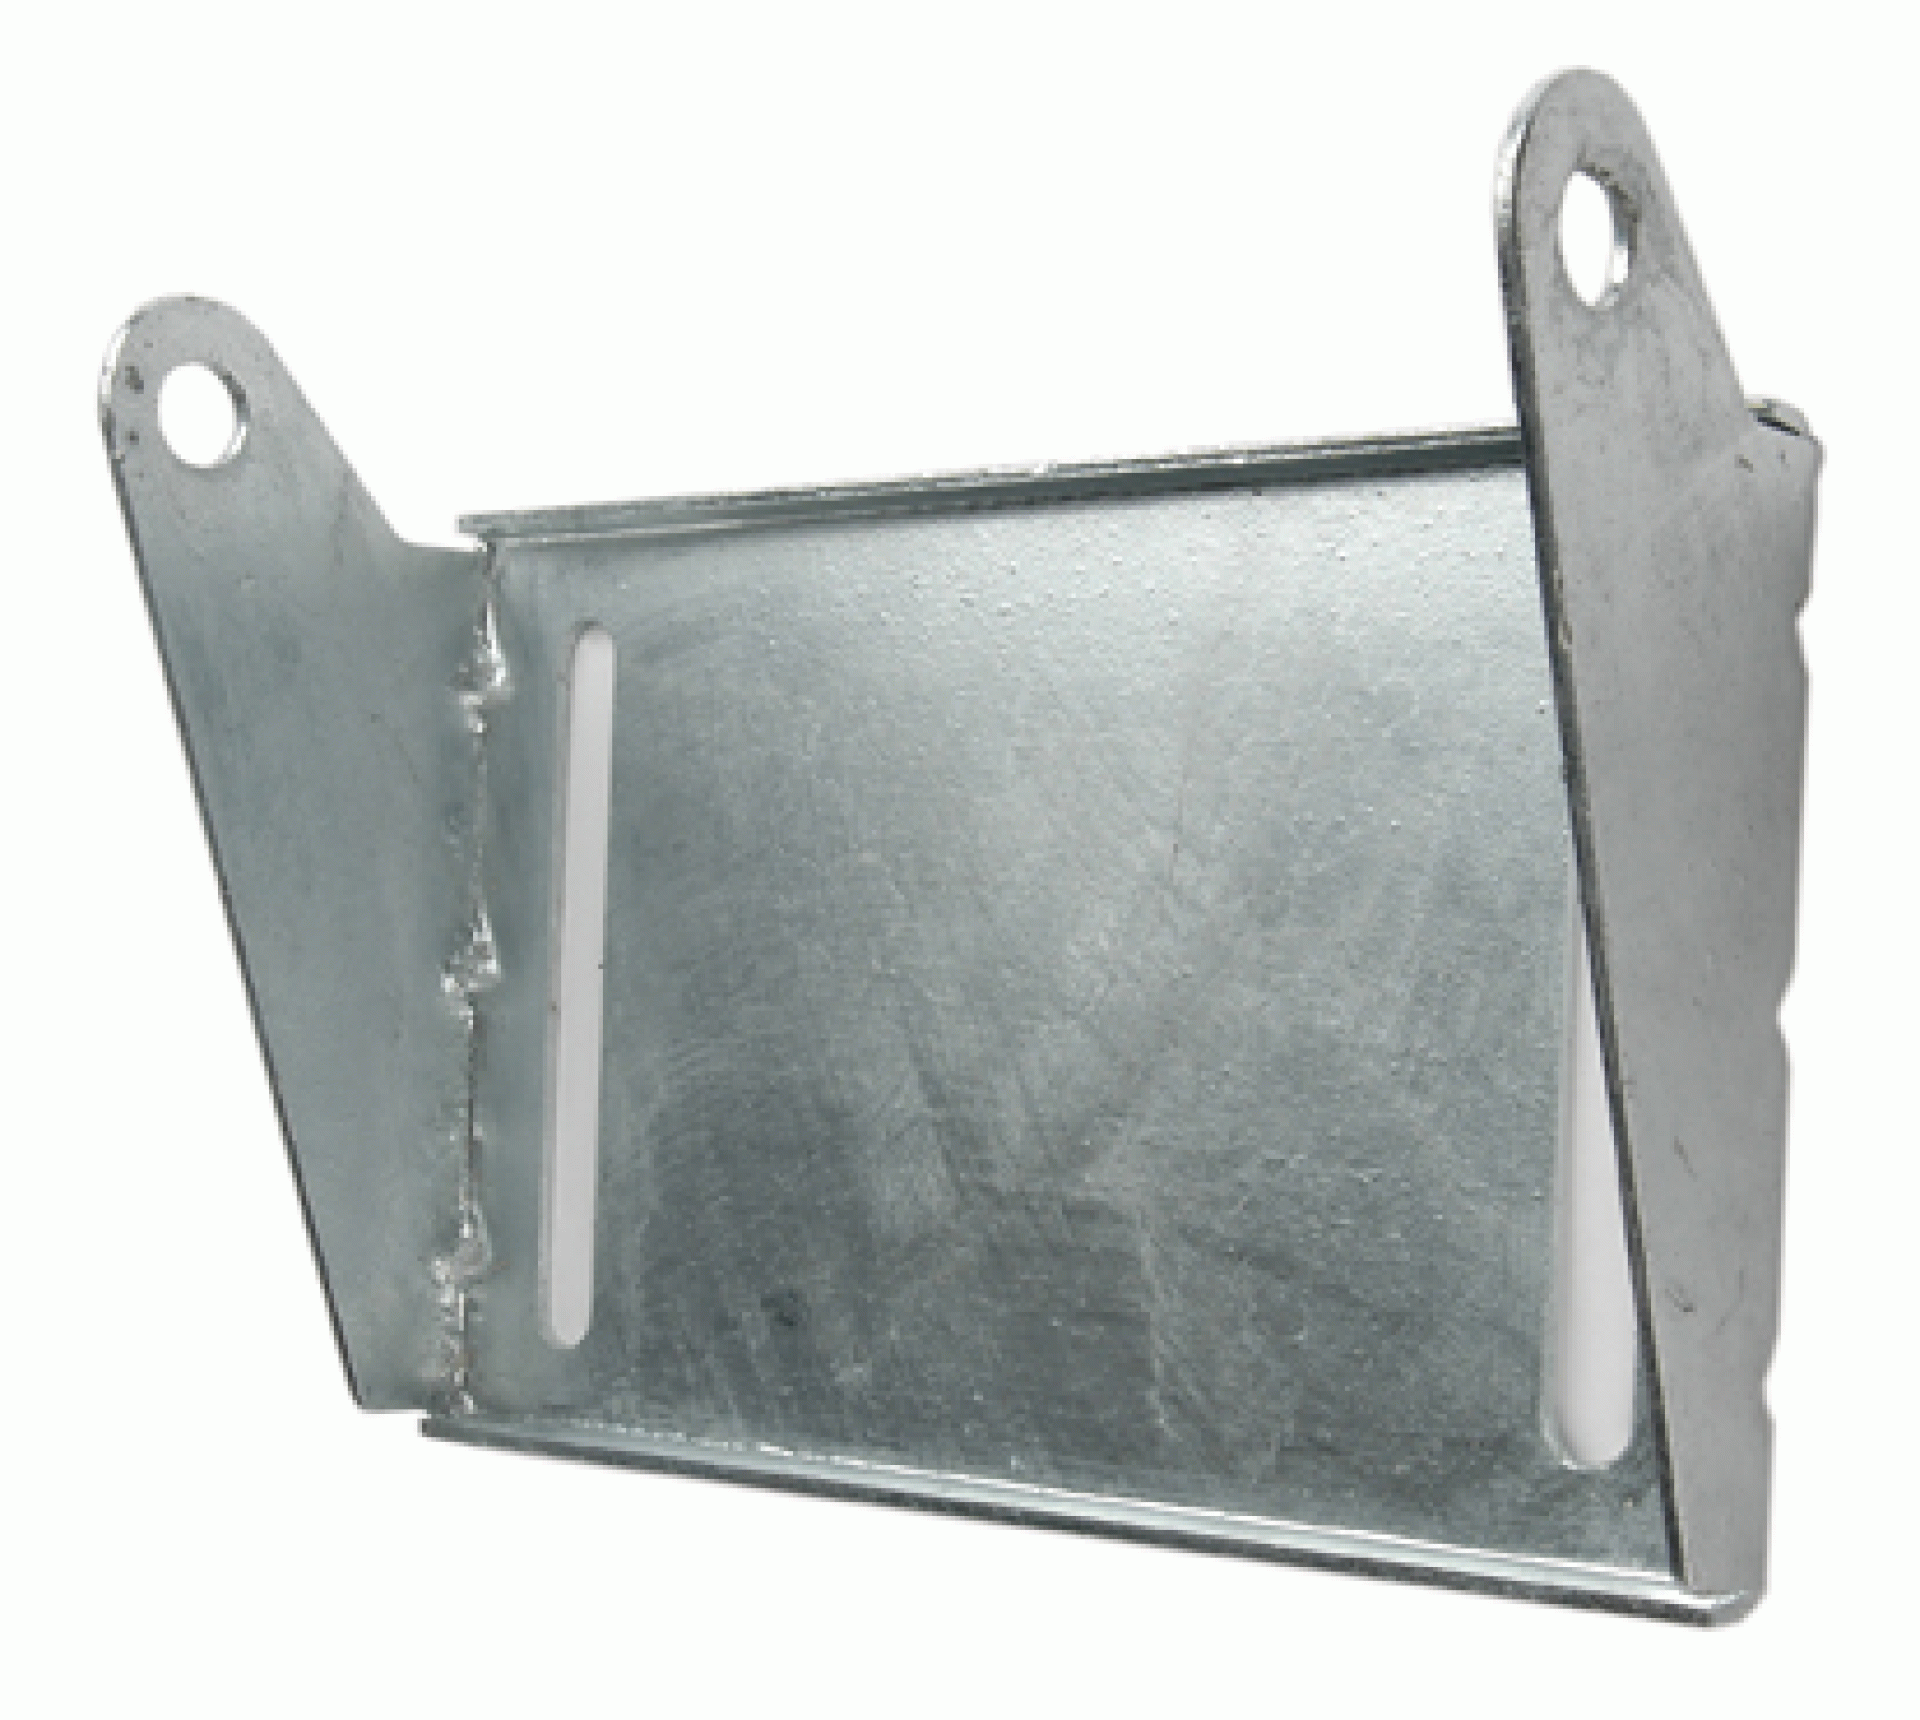 C. E. SMITH CO. INC | 10303G40 | PANEL BRACKET - DESIGNED FOR 8" ROLLERS